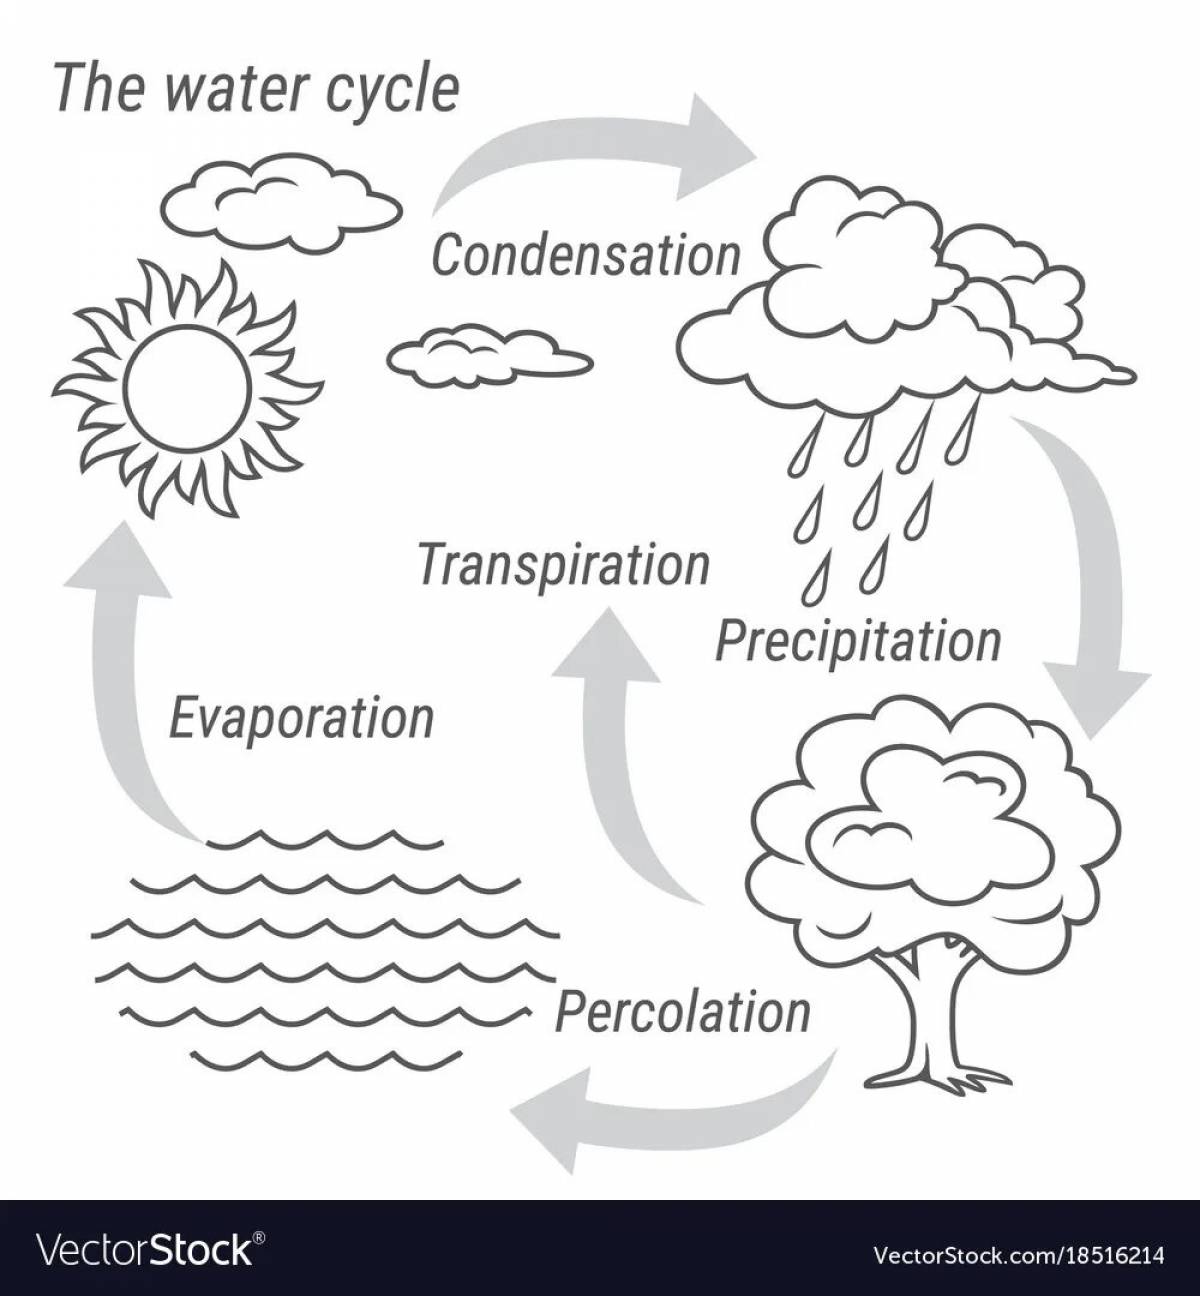 The water cycle for kids #5